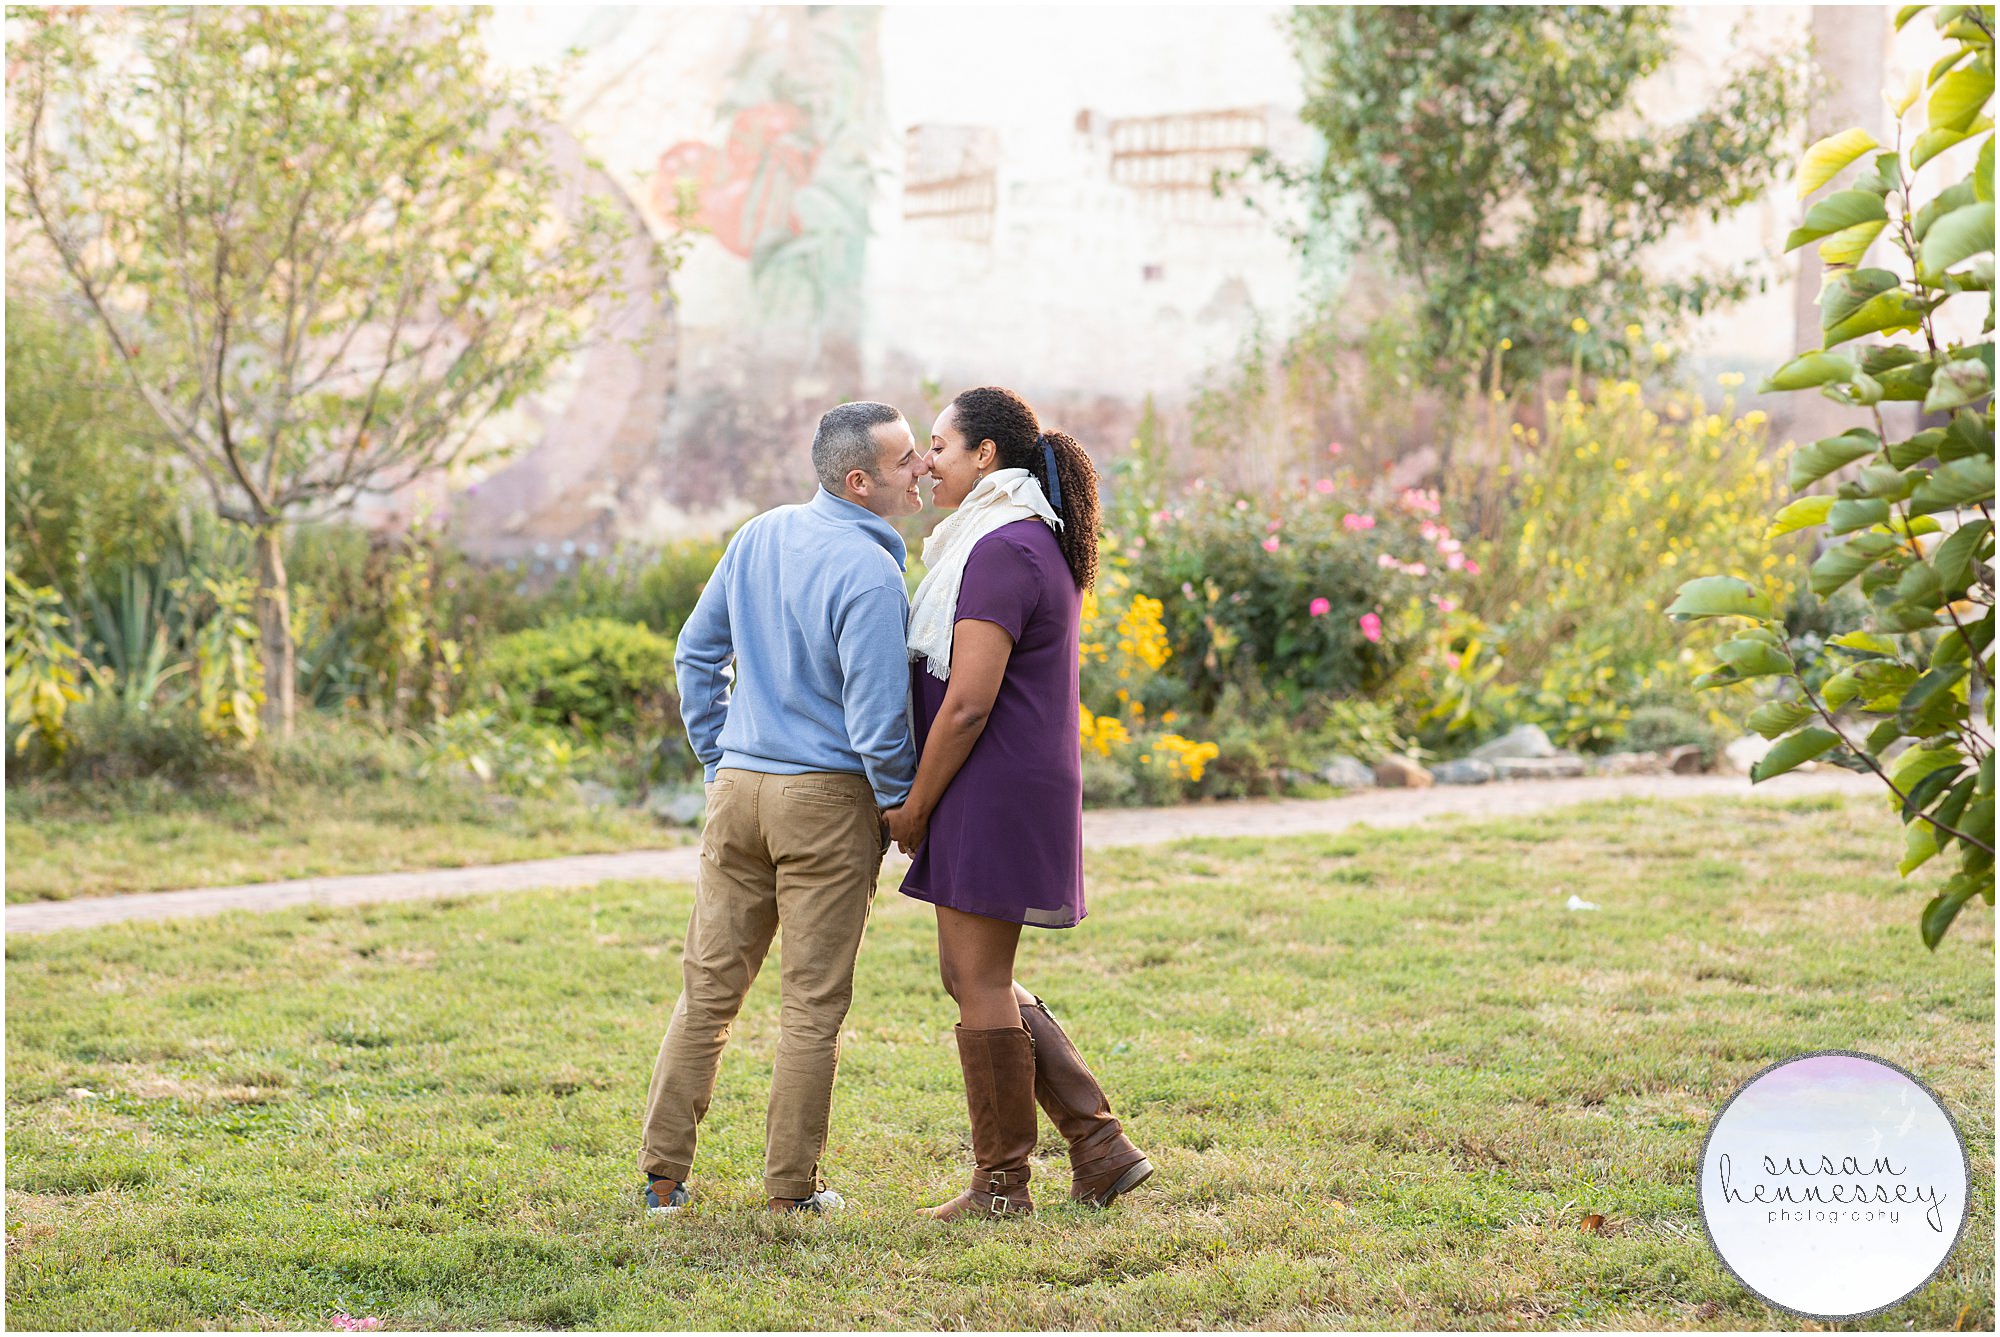 A Northern Liberties Engagement Session a local park